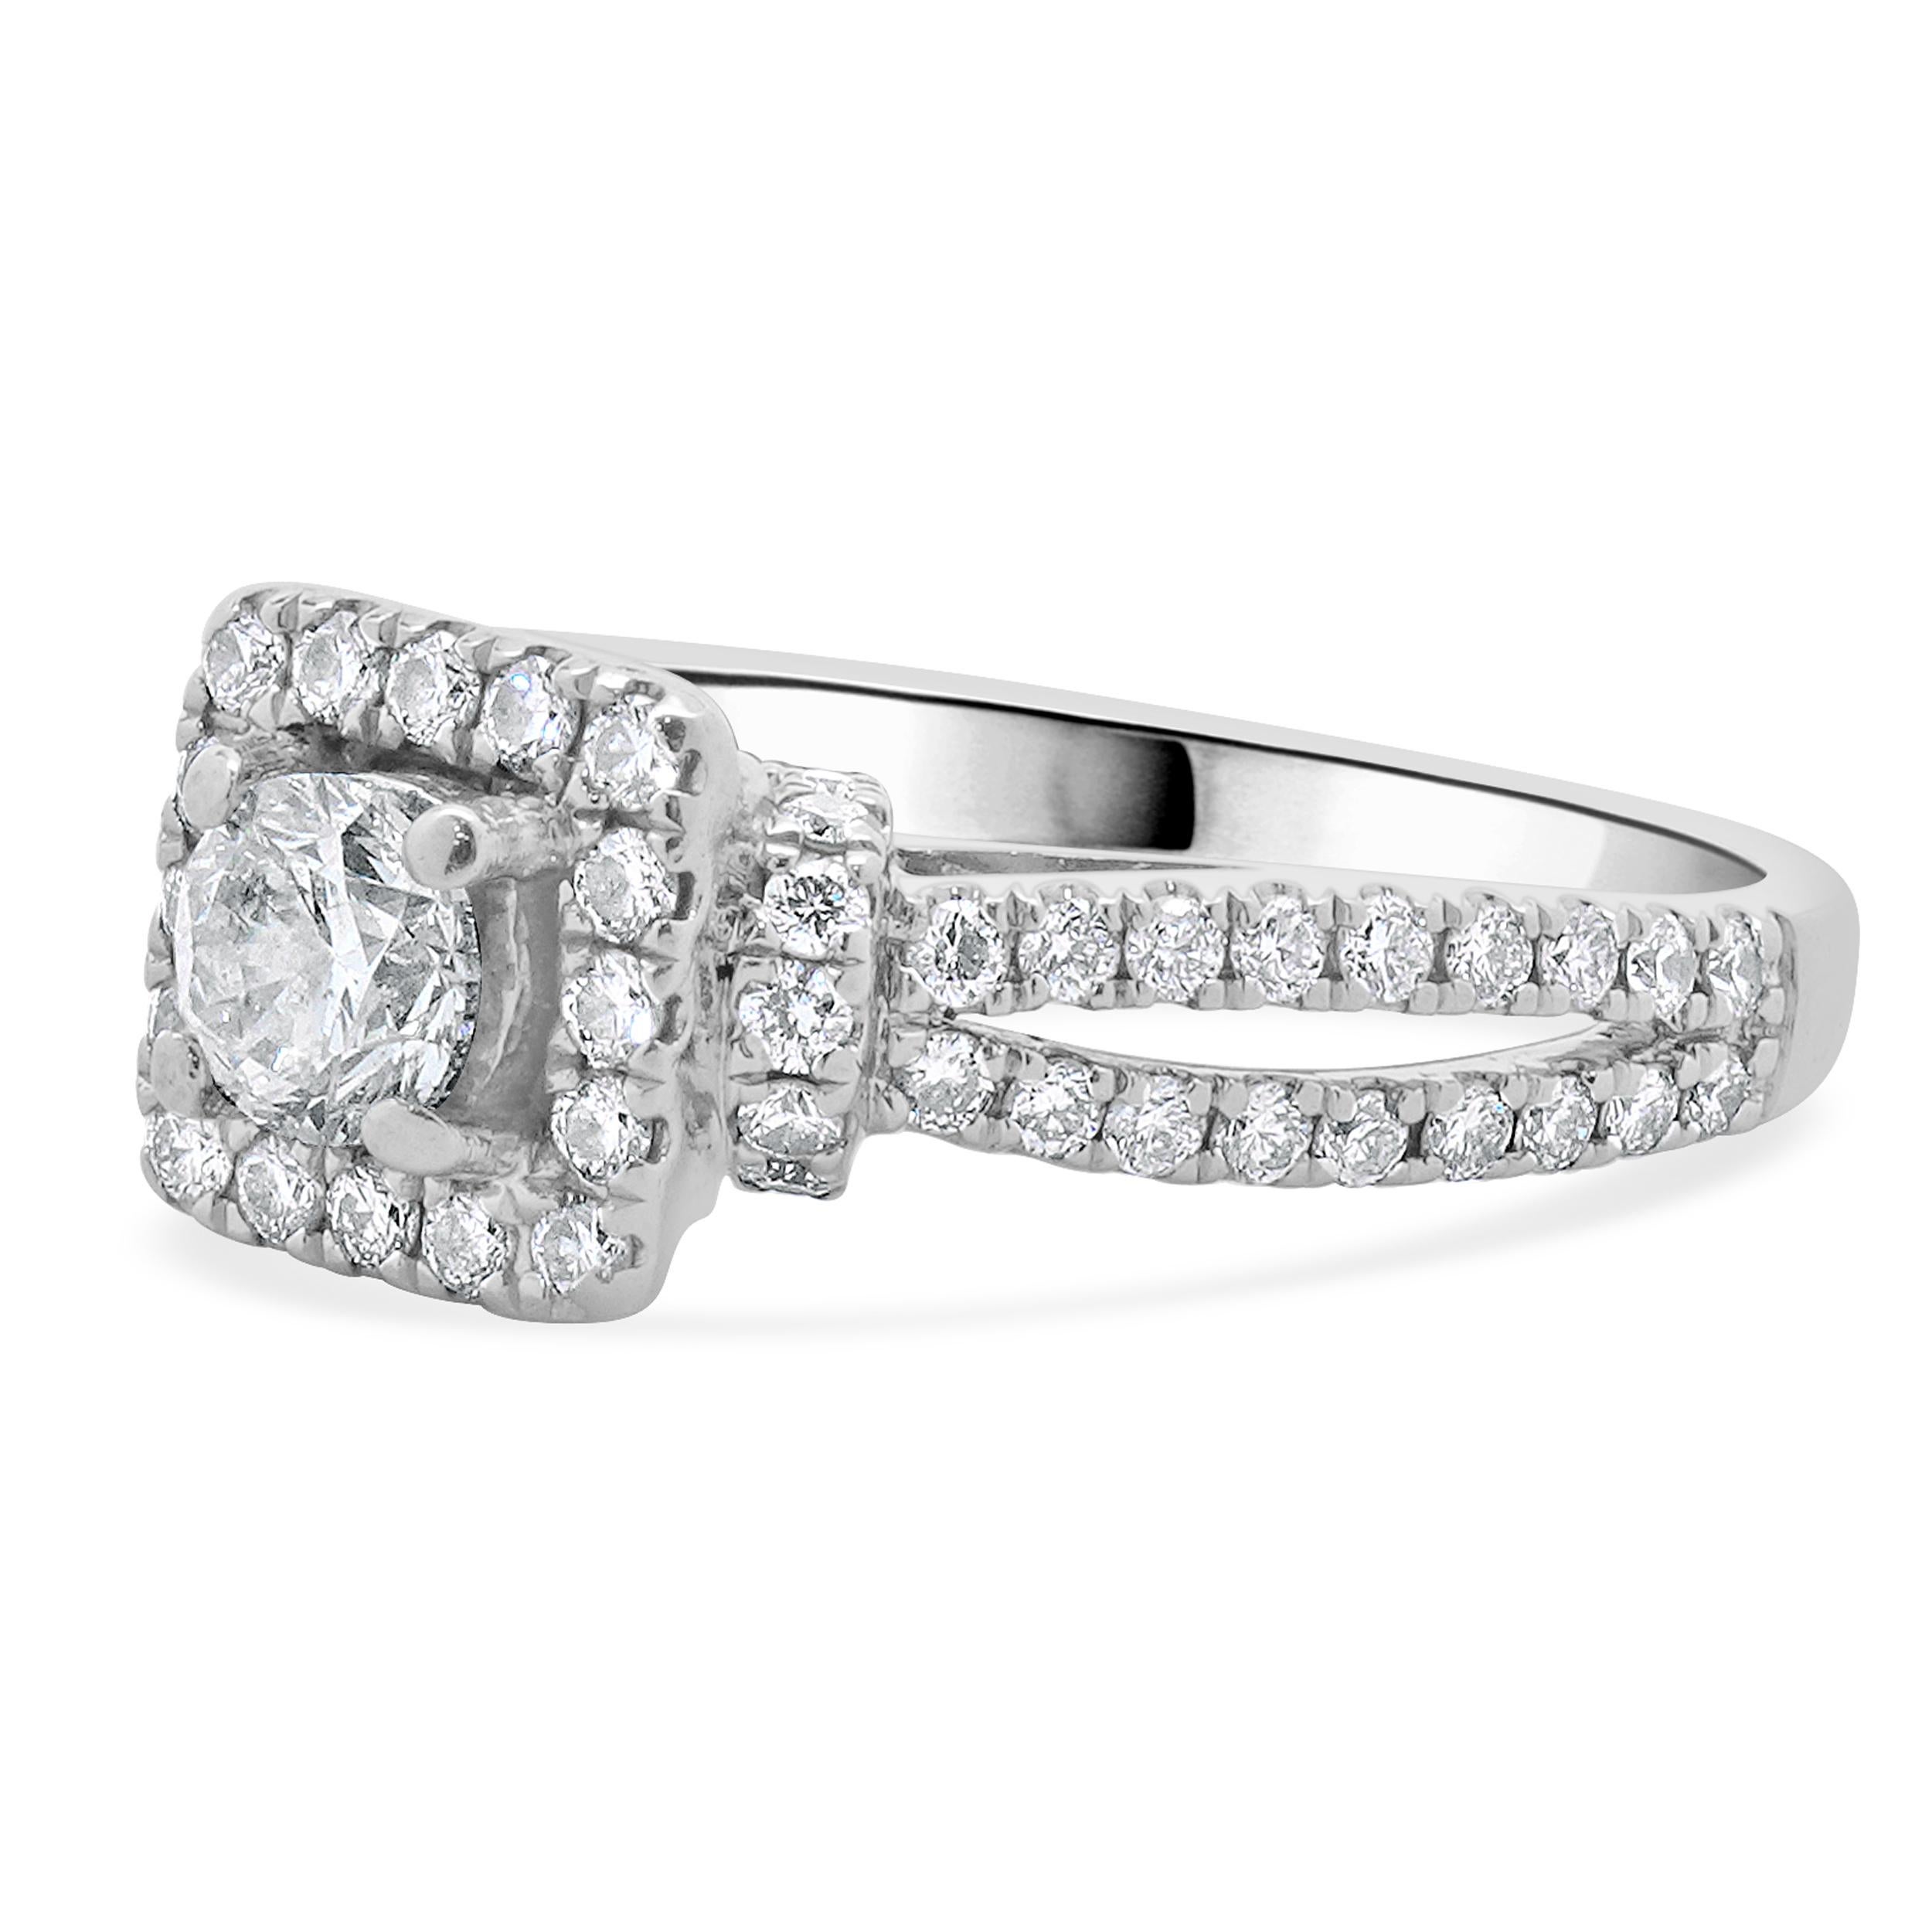 Designer: vera wang
Material: 14K white gold
Diamond: 1 round brilliant cut = 0.34ct
Color: I
Clarity: I1
Diamond: 71 round brilliant cut = 0.70cttw
Color: H
Clarity: I1
Dimensions: ring top measures 8mm wide
Ring Size: 5 (complimentary sizing